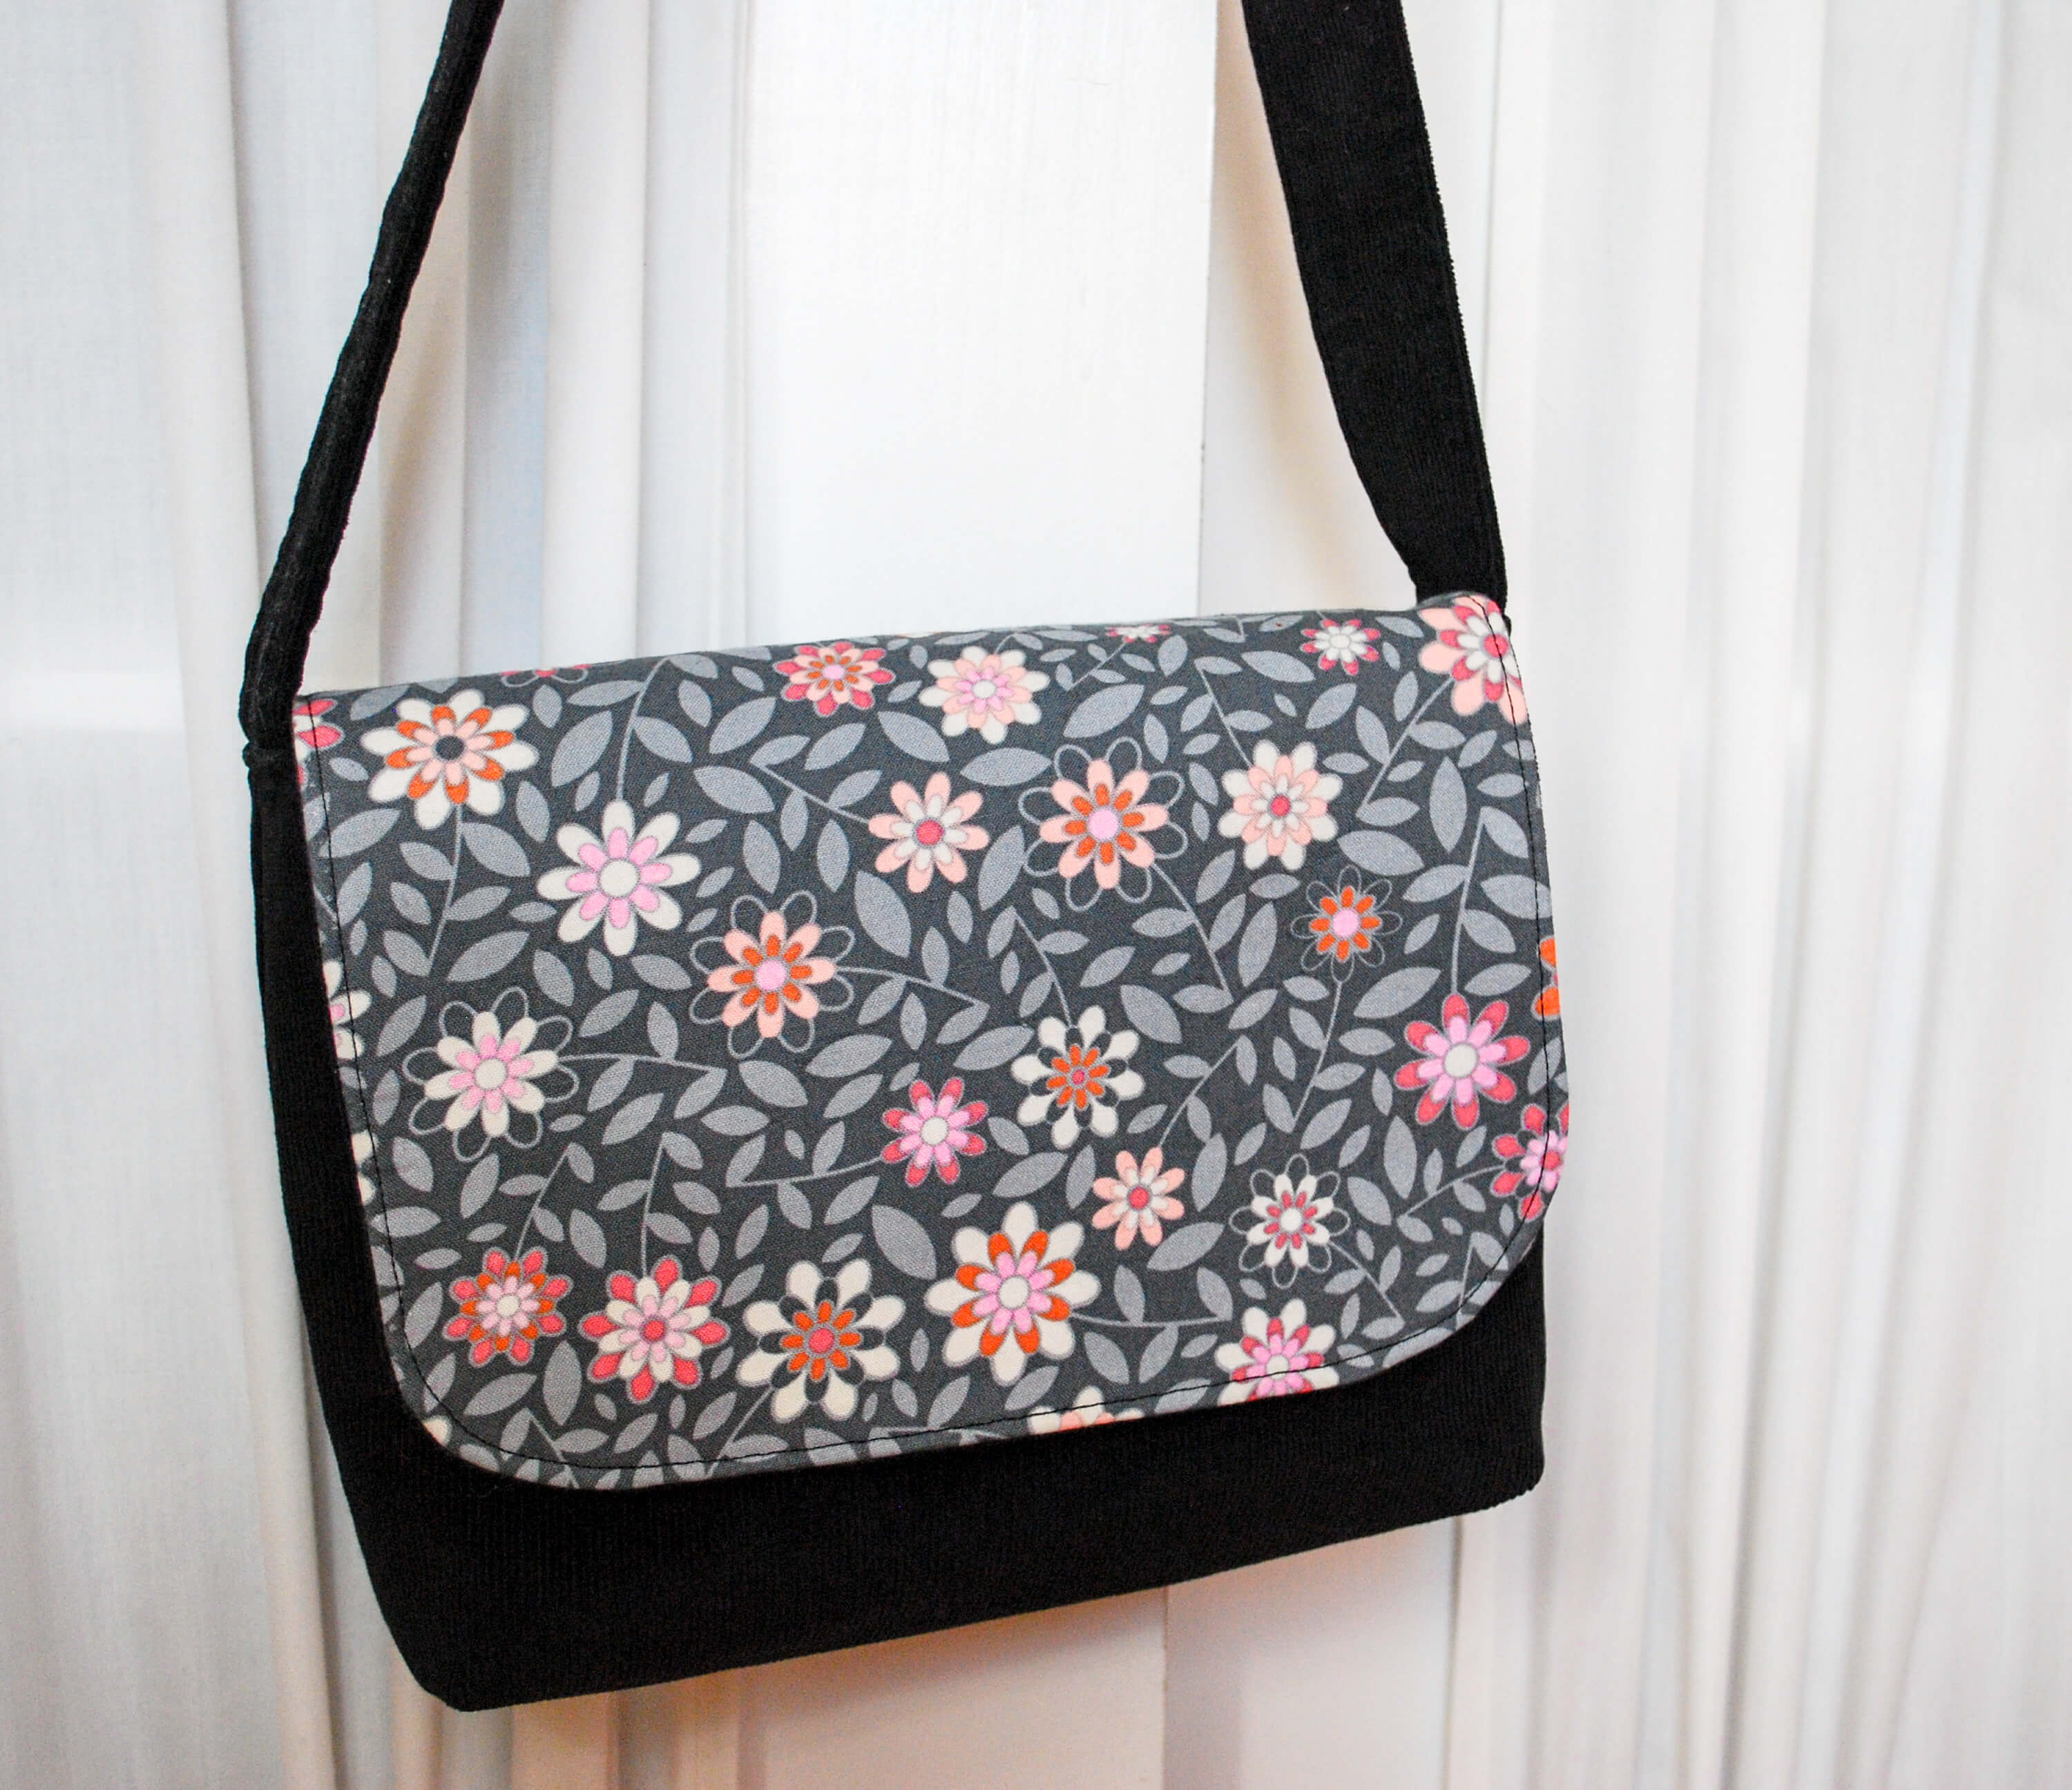 Kid-sized Messenger Bag Free Pattern and Sewing Tutorial - Merriment Design